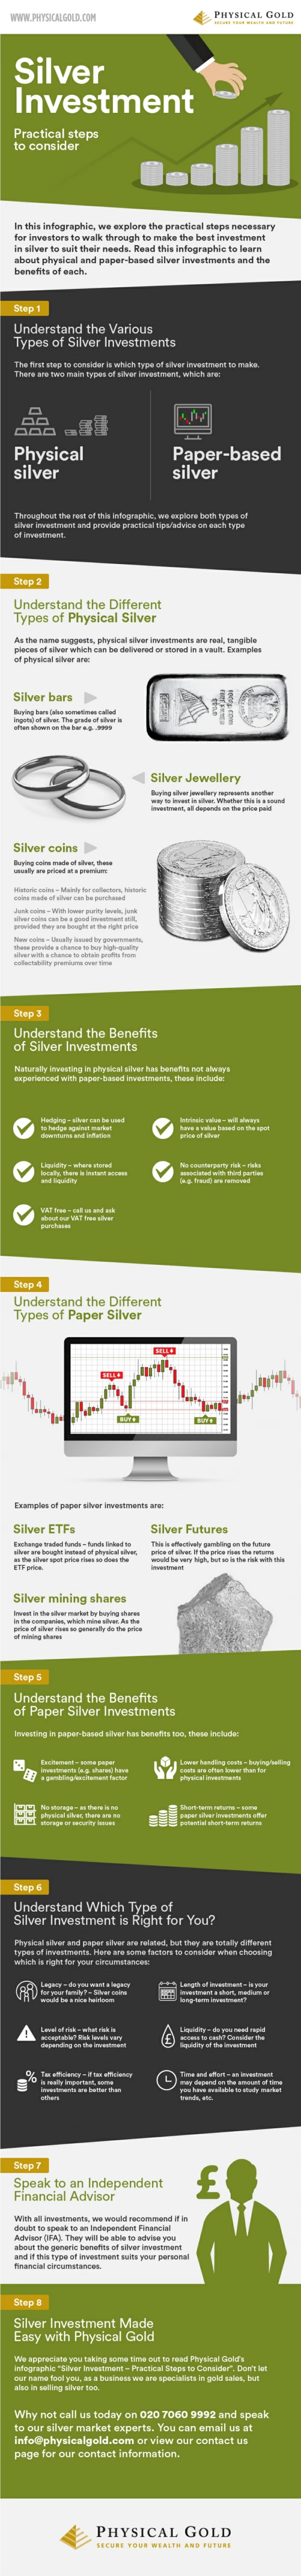 An infographic about every type of silver from Physical Gold